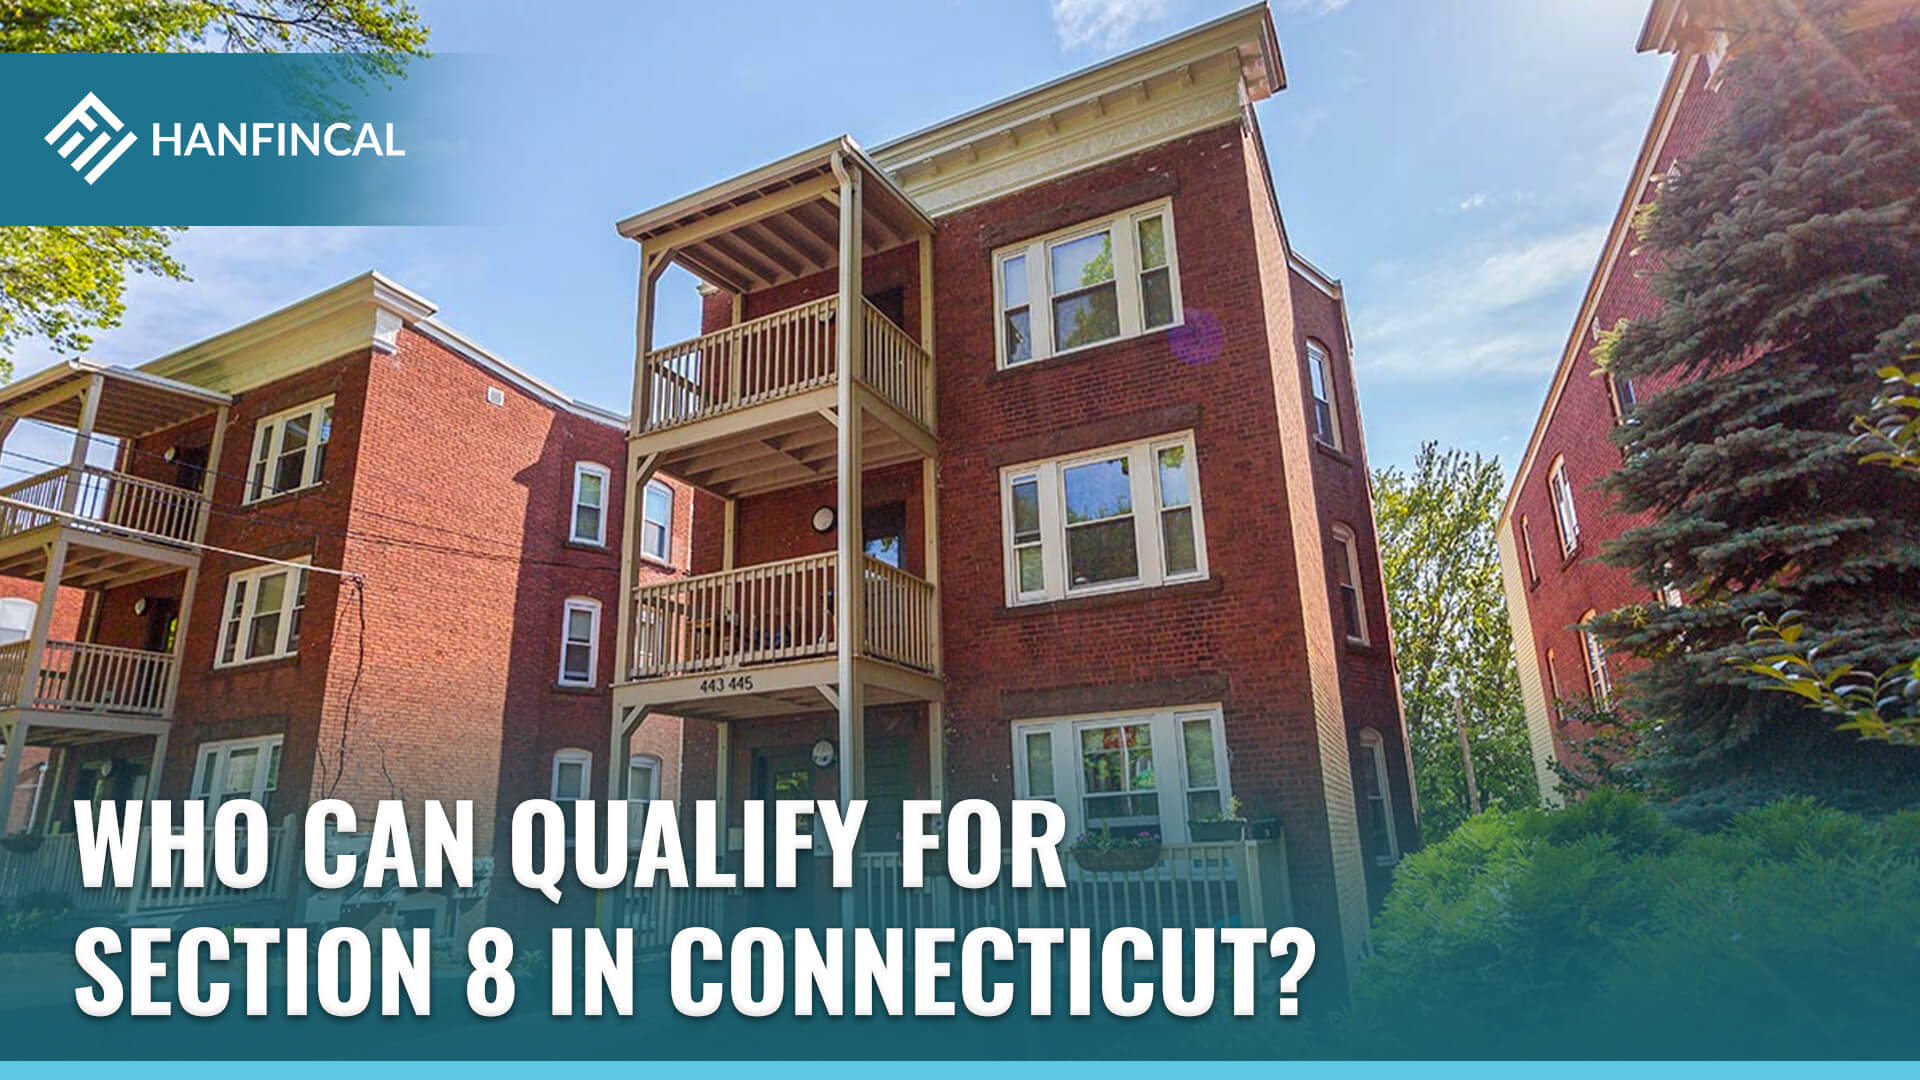 How to qualify for Section 8 in Connecticut?